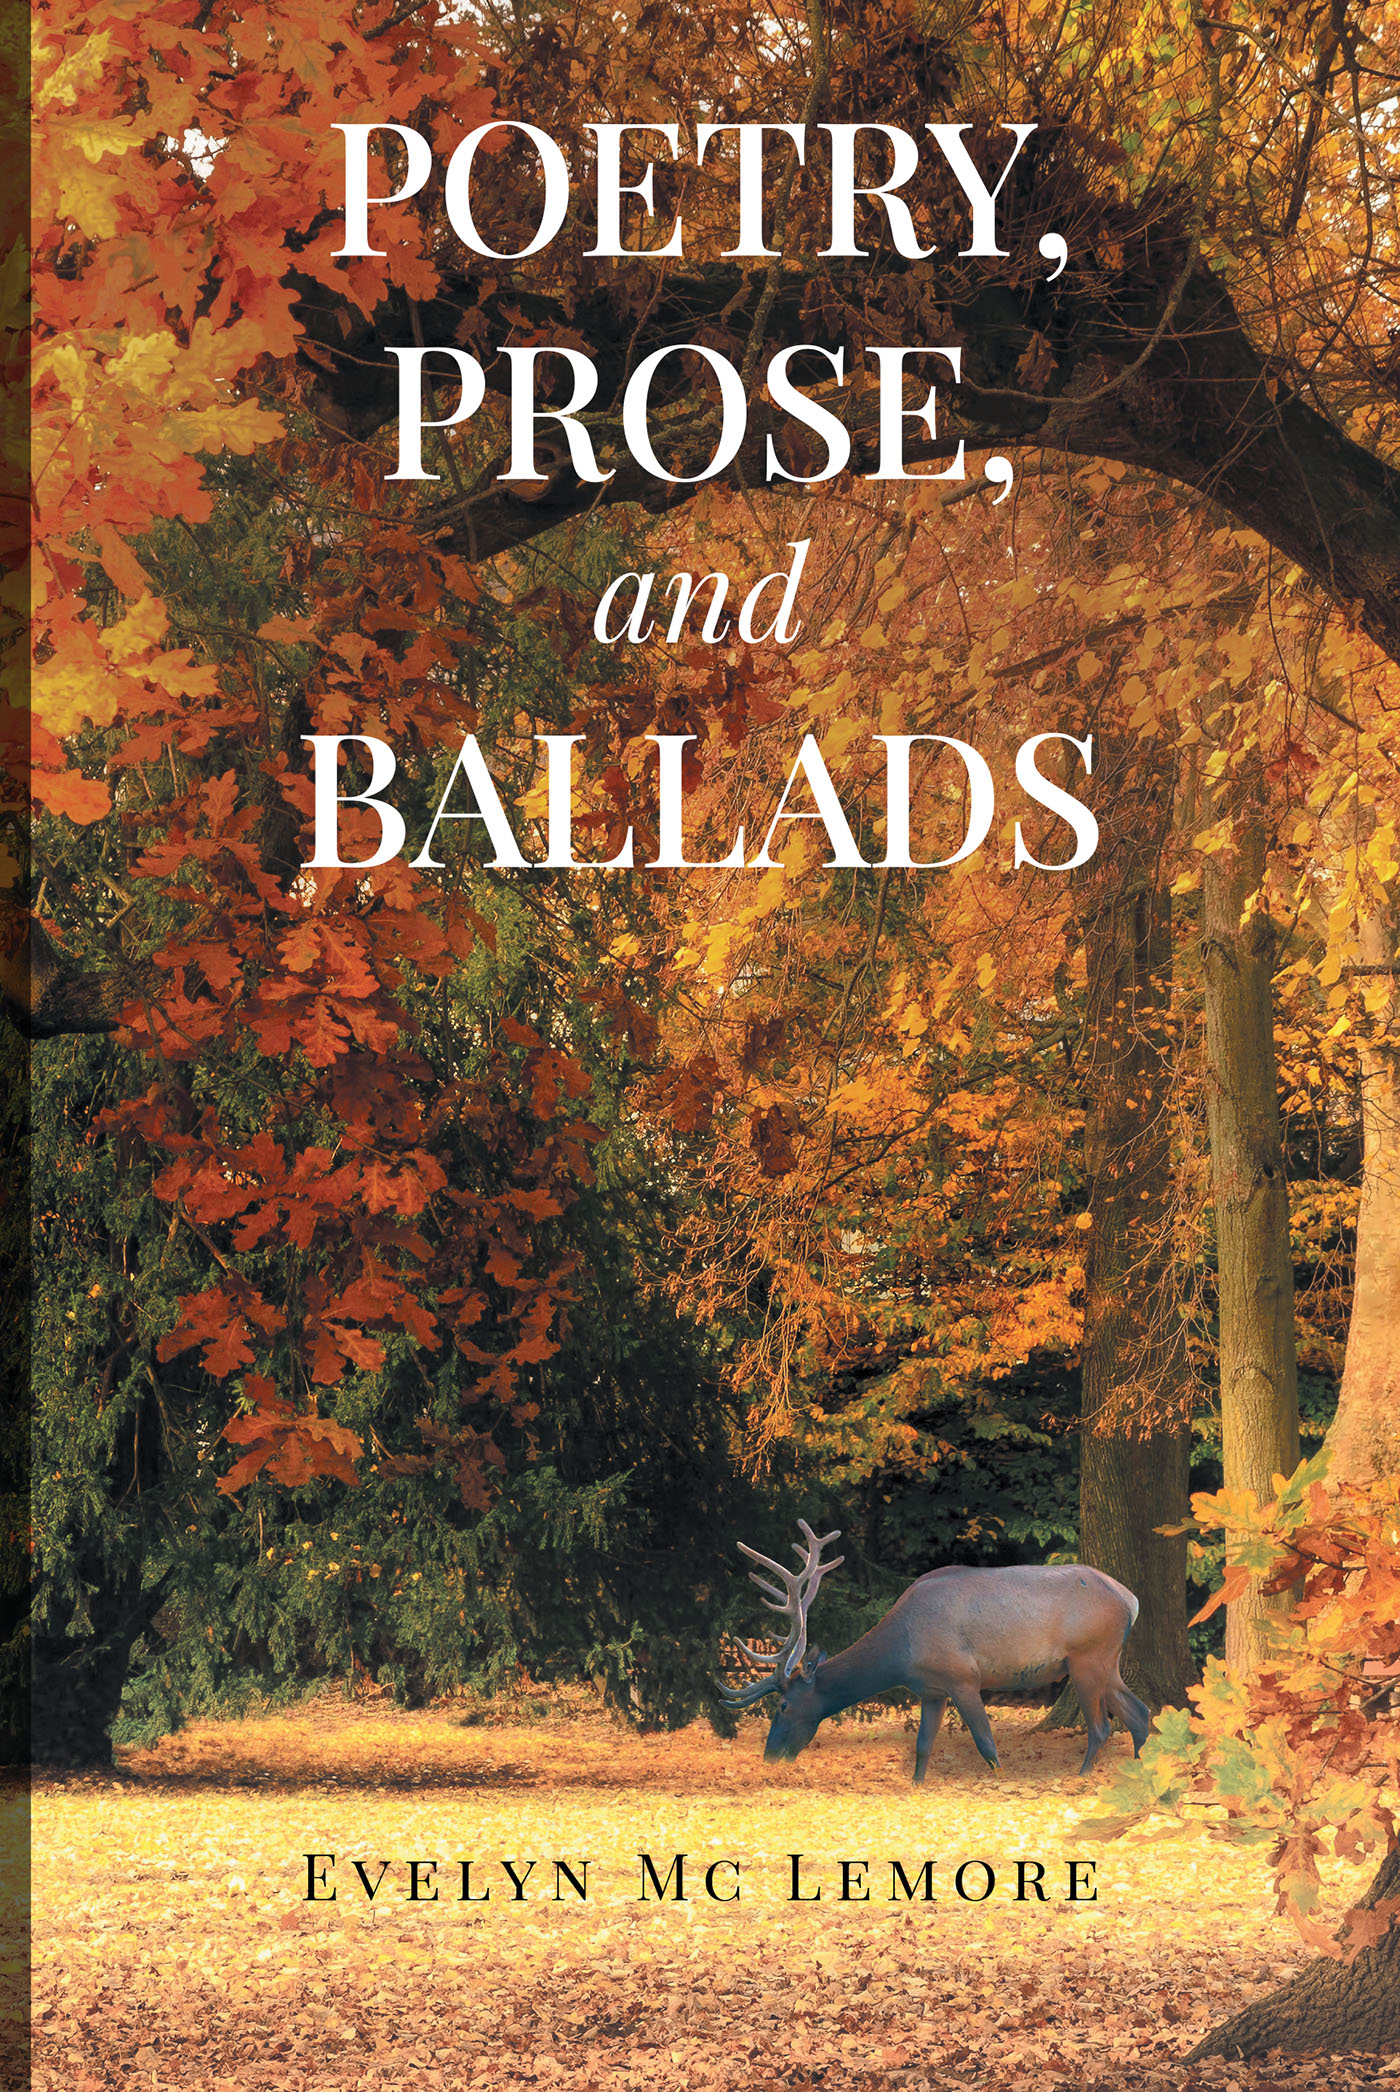 Author Evelyn Mc Lemore’s New Book, "Poetry, Prose, and Ballads," is a Thought-Provoking Series That Invite Readers to Learn of the Author's Life Through Her Poems